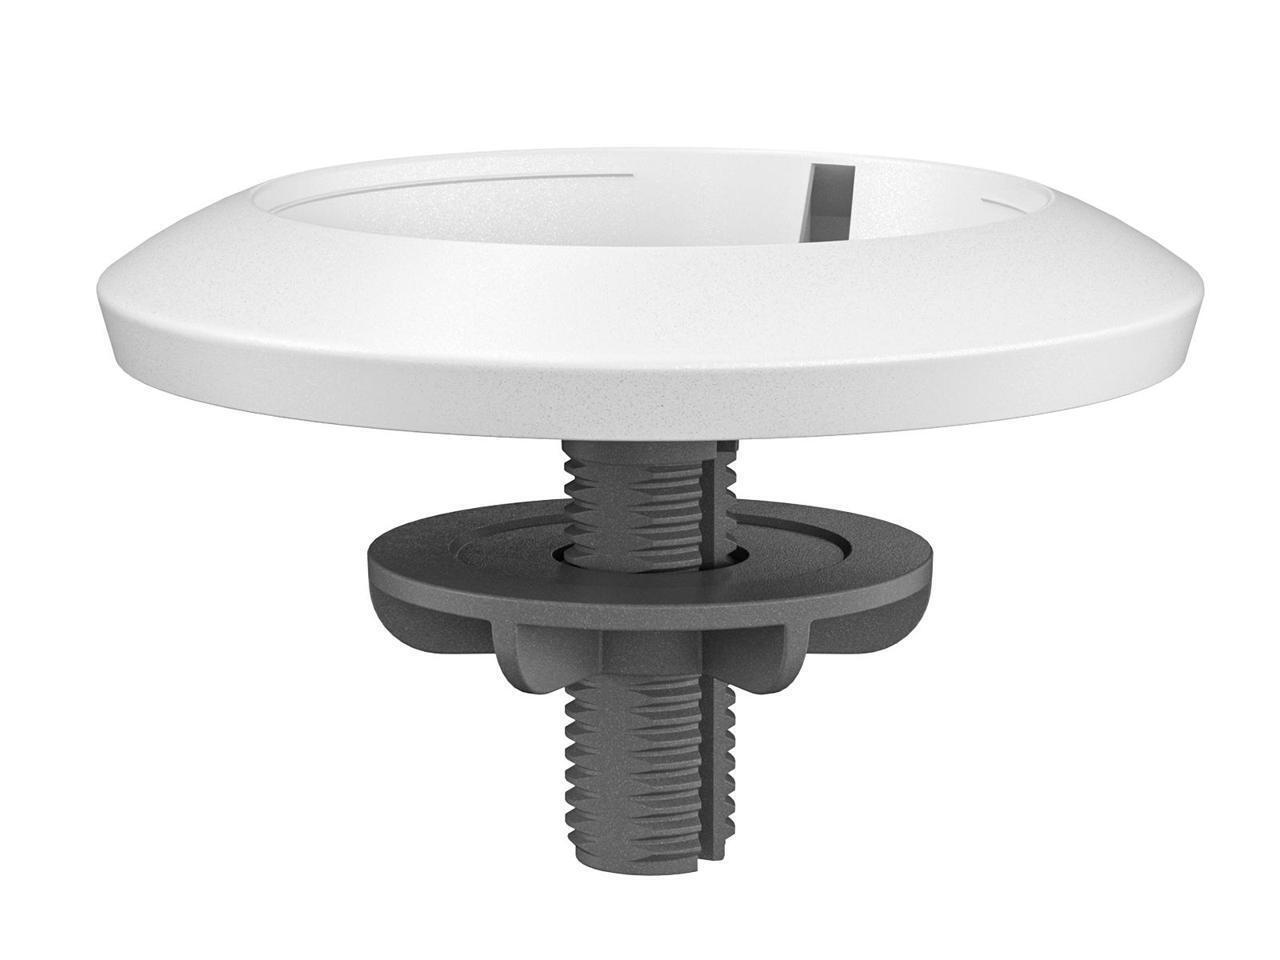 Logitech Ceiling Mount for Microphone White 952000020